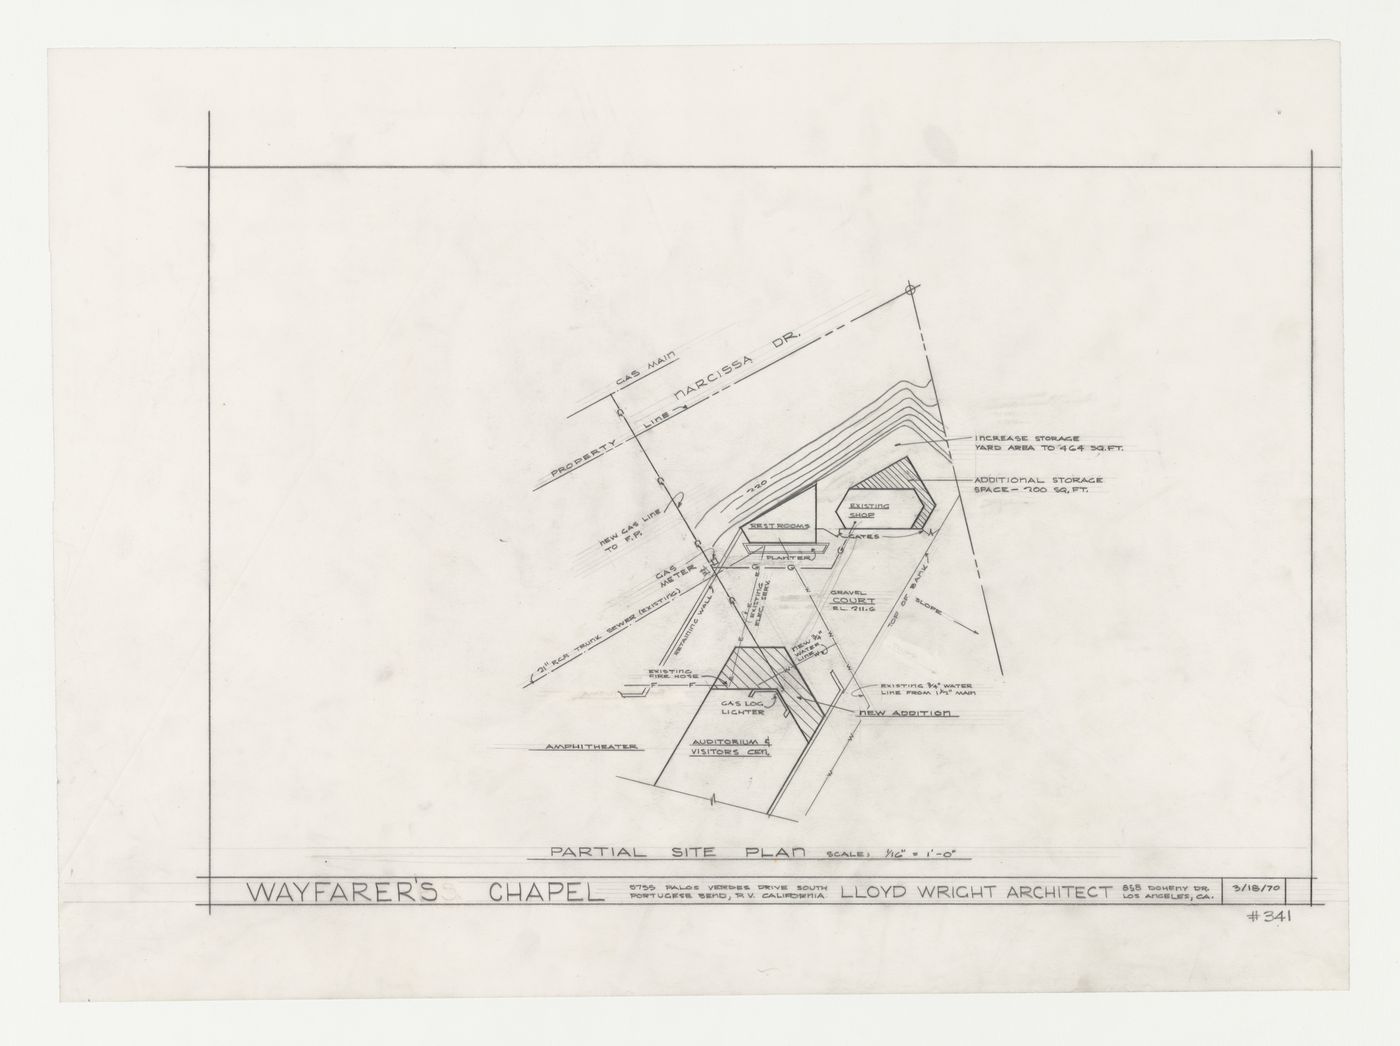 Wayfarers' Chapel, Palos Verdes, California: Partial site plan showing parish house with auditorium addition, rest rooms and work shed